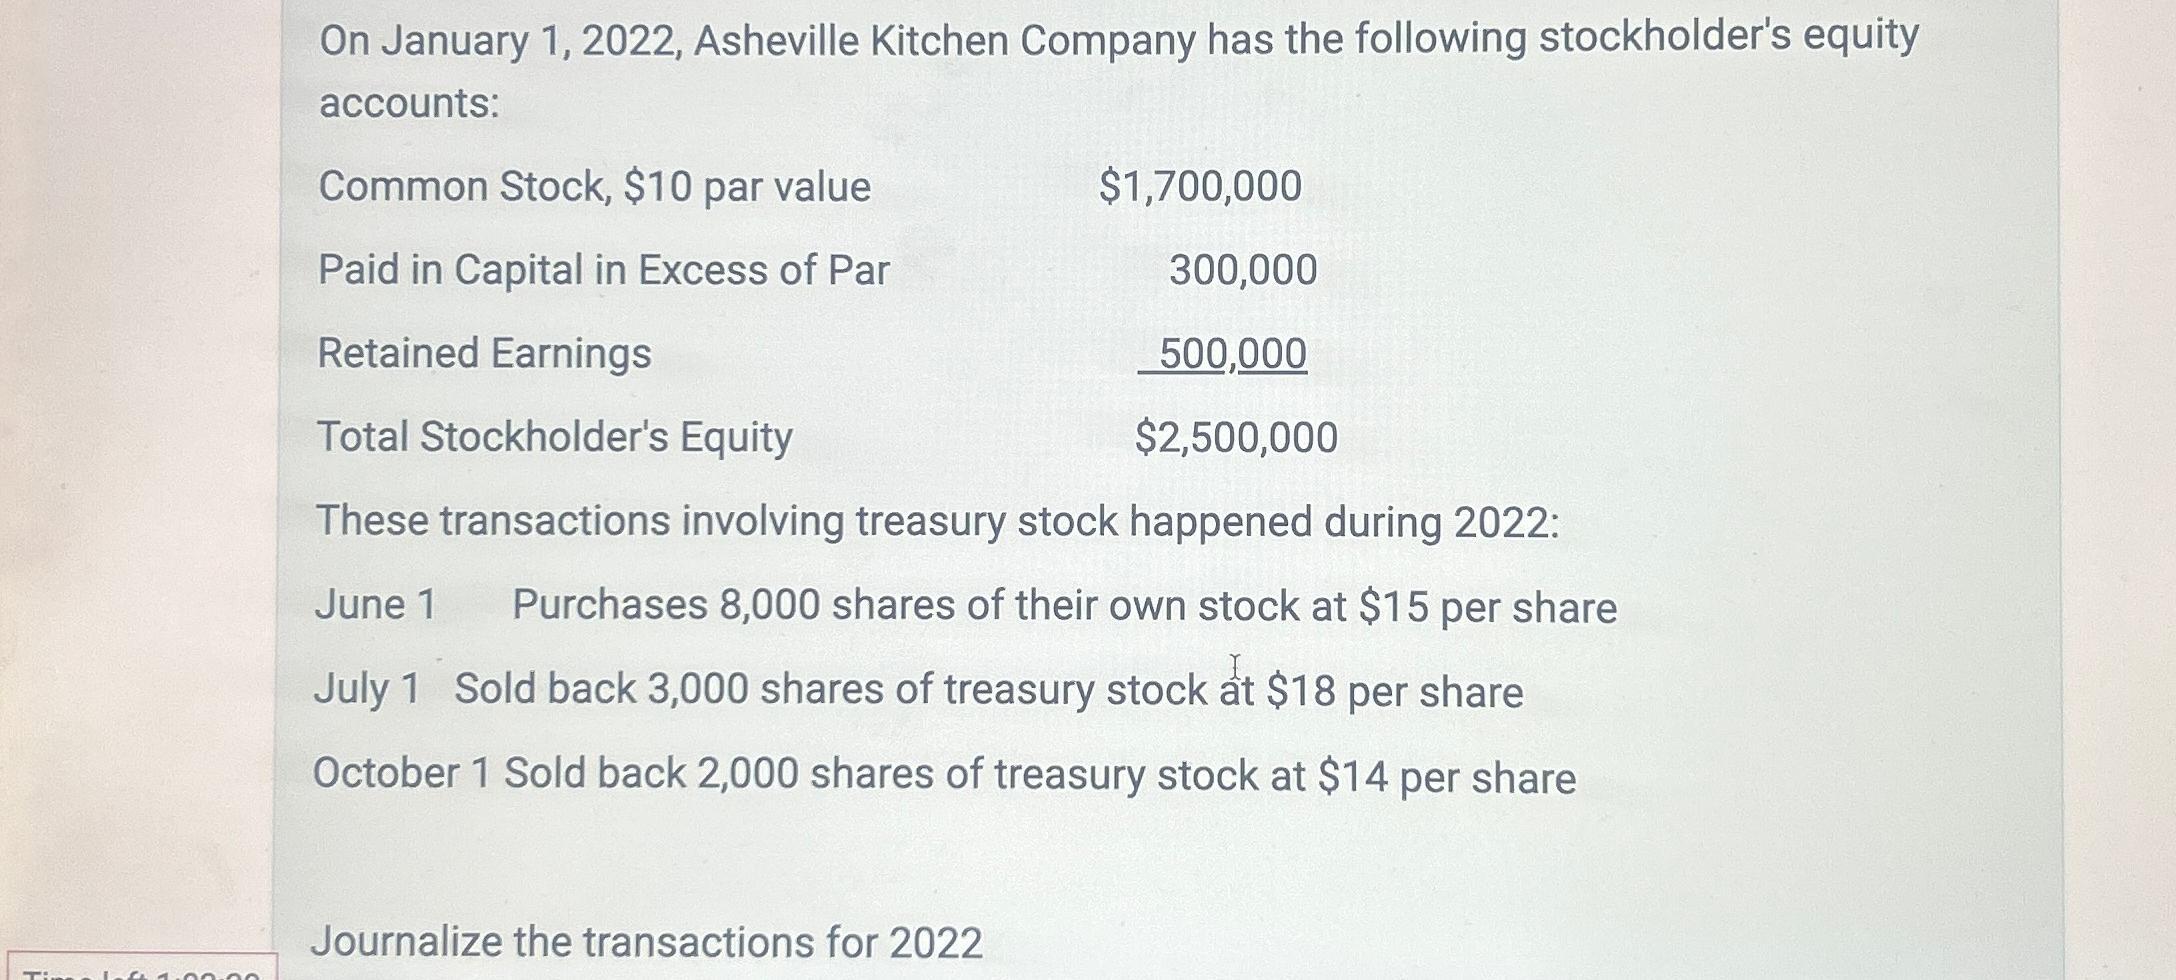 T: On January 1, 2022, Asheville Kitchen Company has the following stockholder's equity accounts: Common